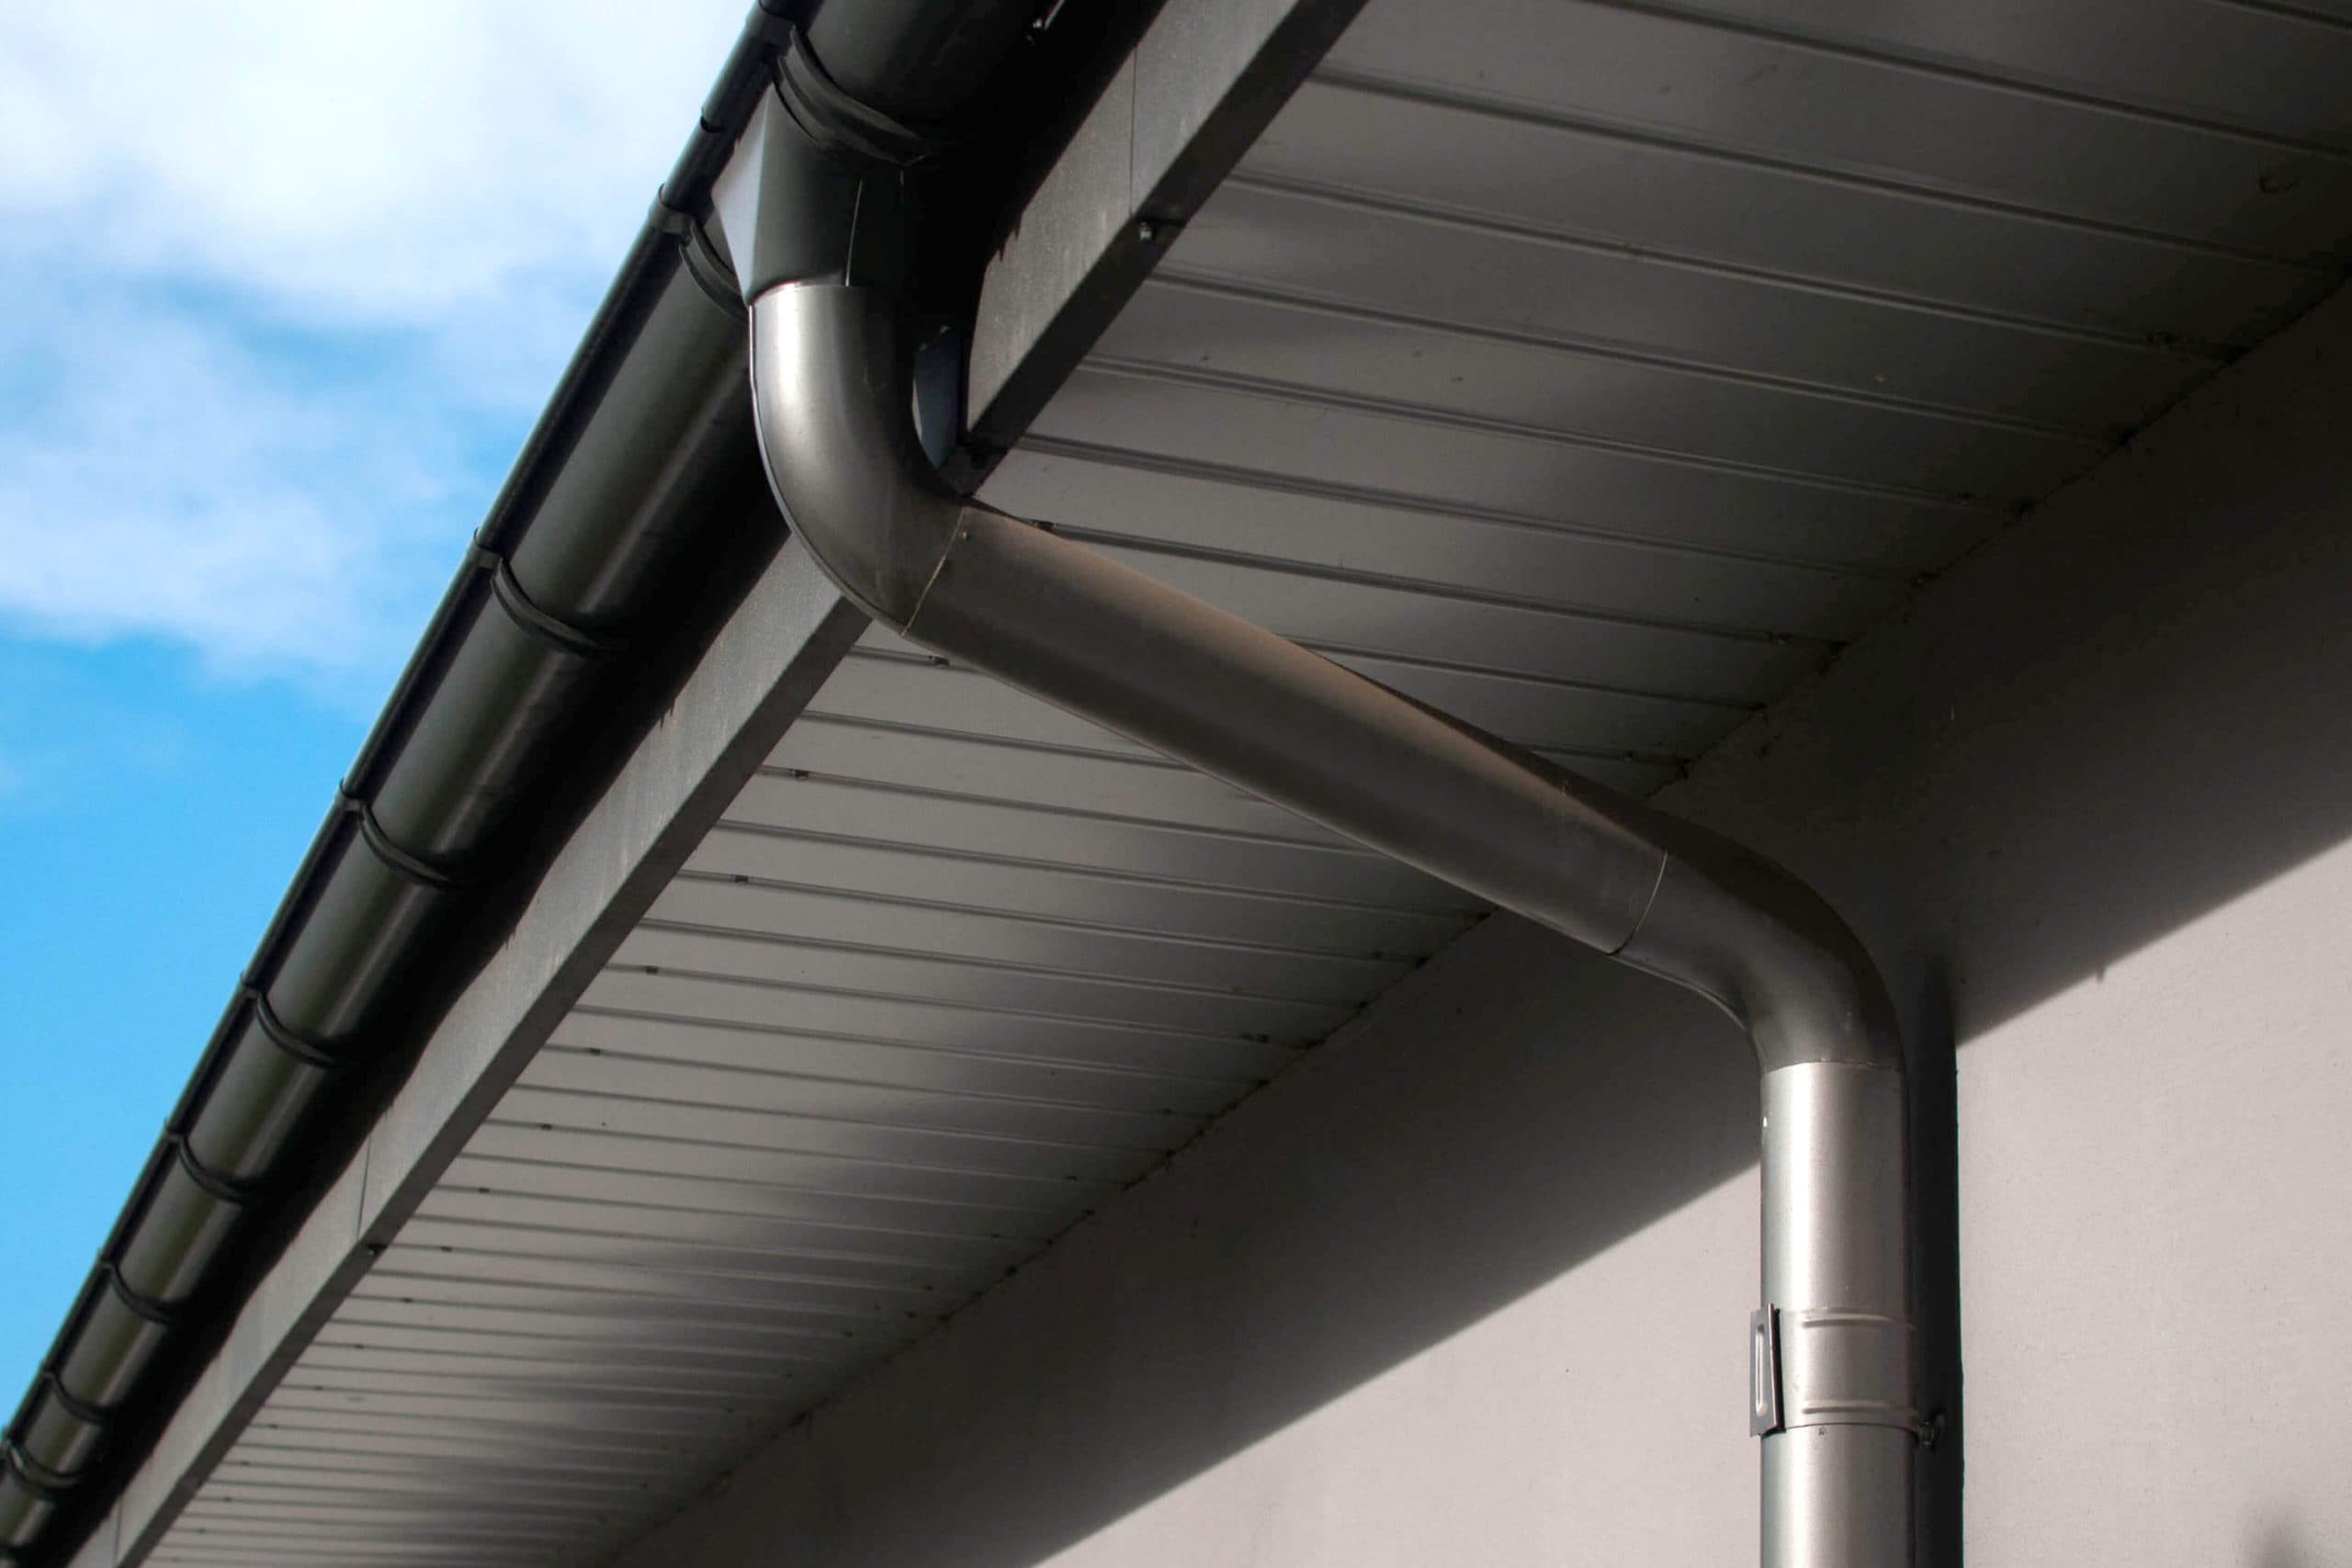 Reliable and affordable Galvanized gutters installation in Gainesville